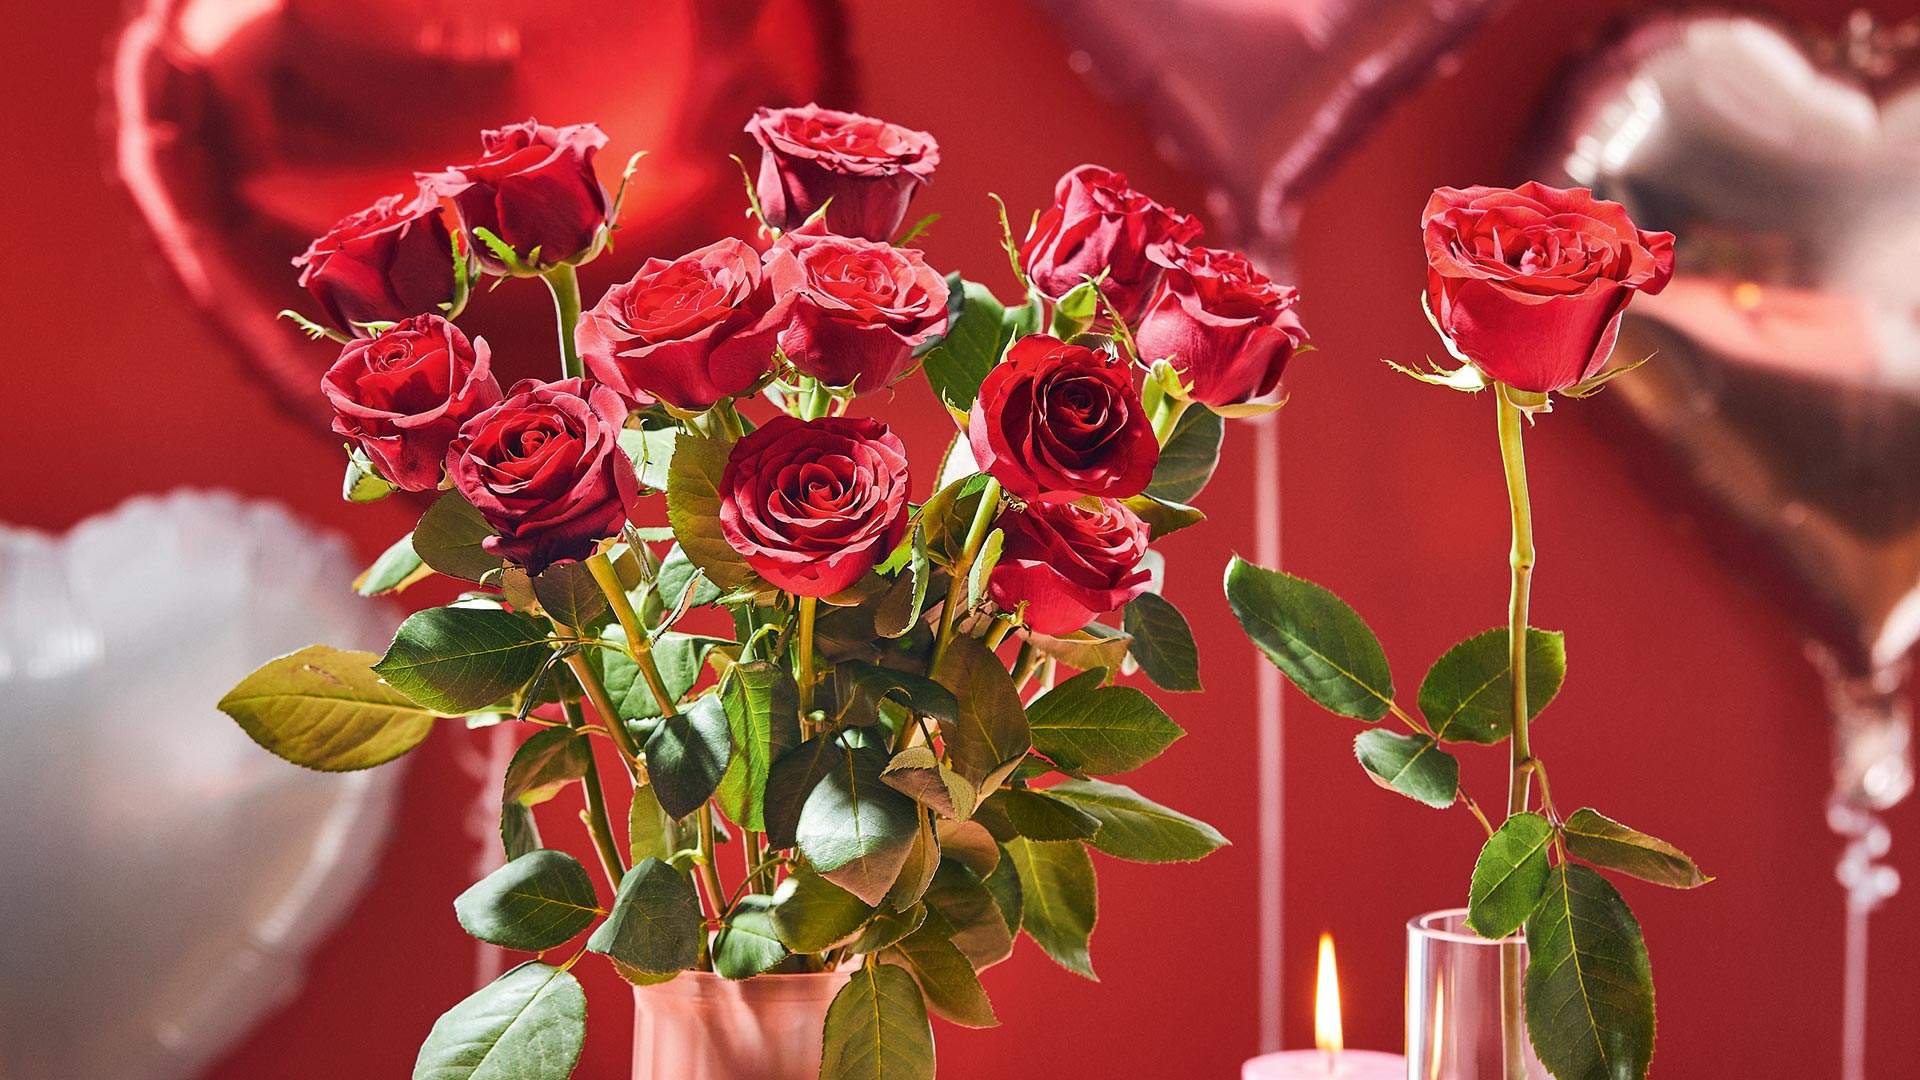 ALDI Is Doing a Dozen Roses and a Bottle of Rosé for $30 If You Need a Last-Minute Valentine's Day Gift